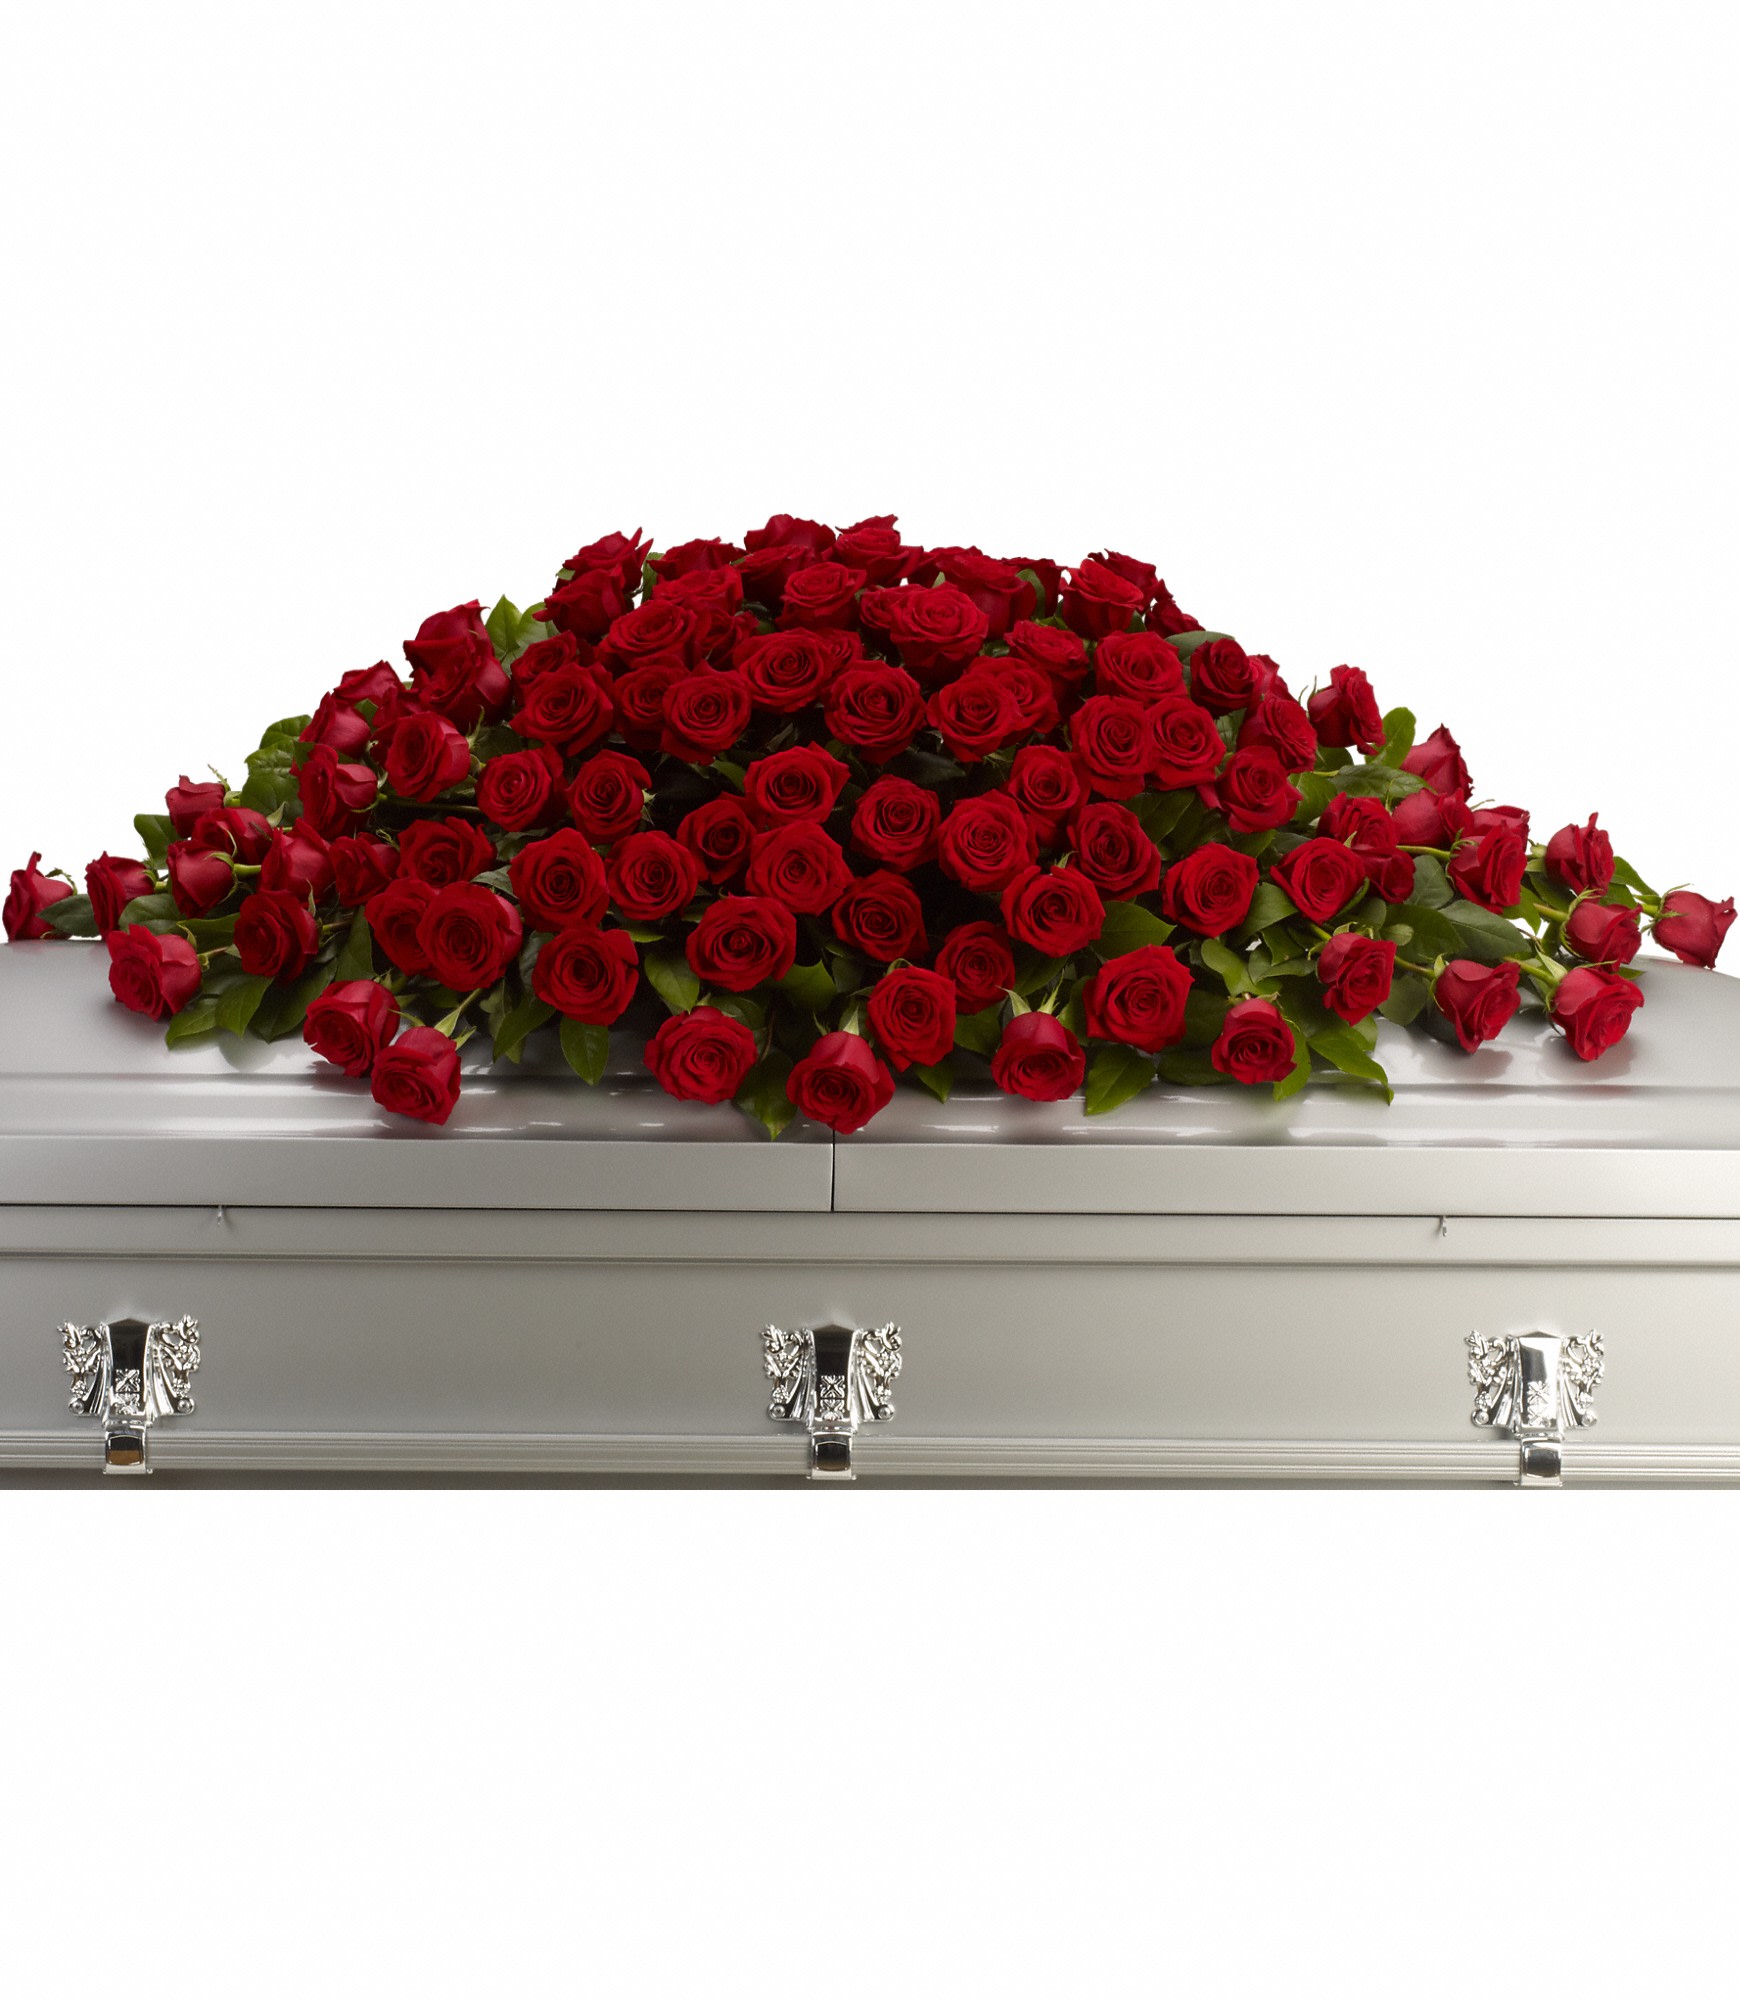 Greatest Love Casket Spray by Teleflora - A loving embrace of rich, regal roses in an all-red spray to adorn the casket. 